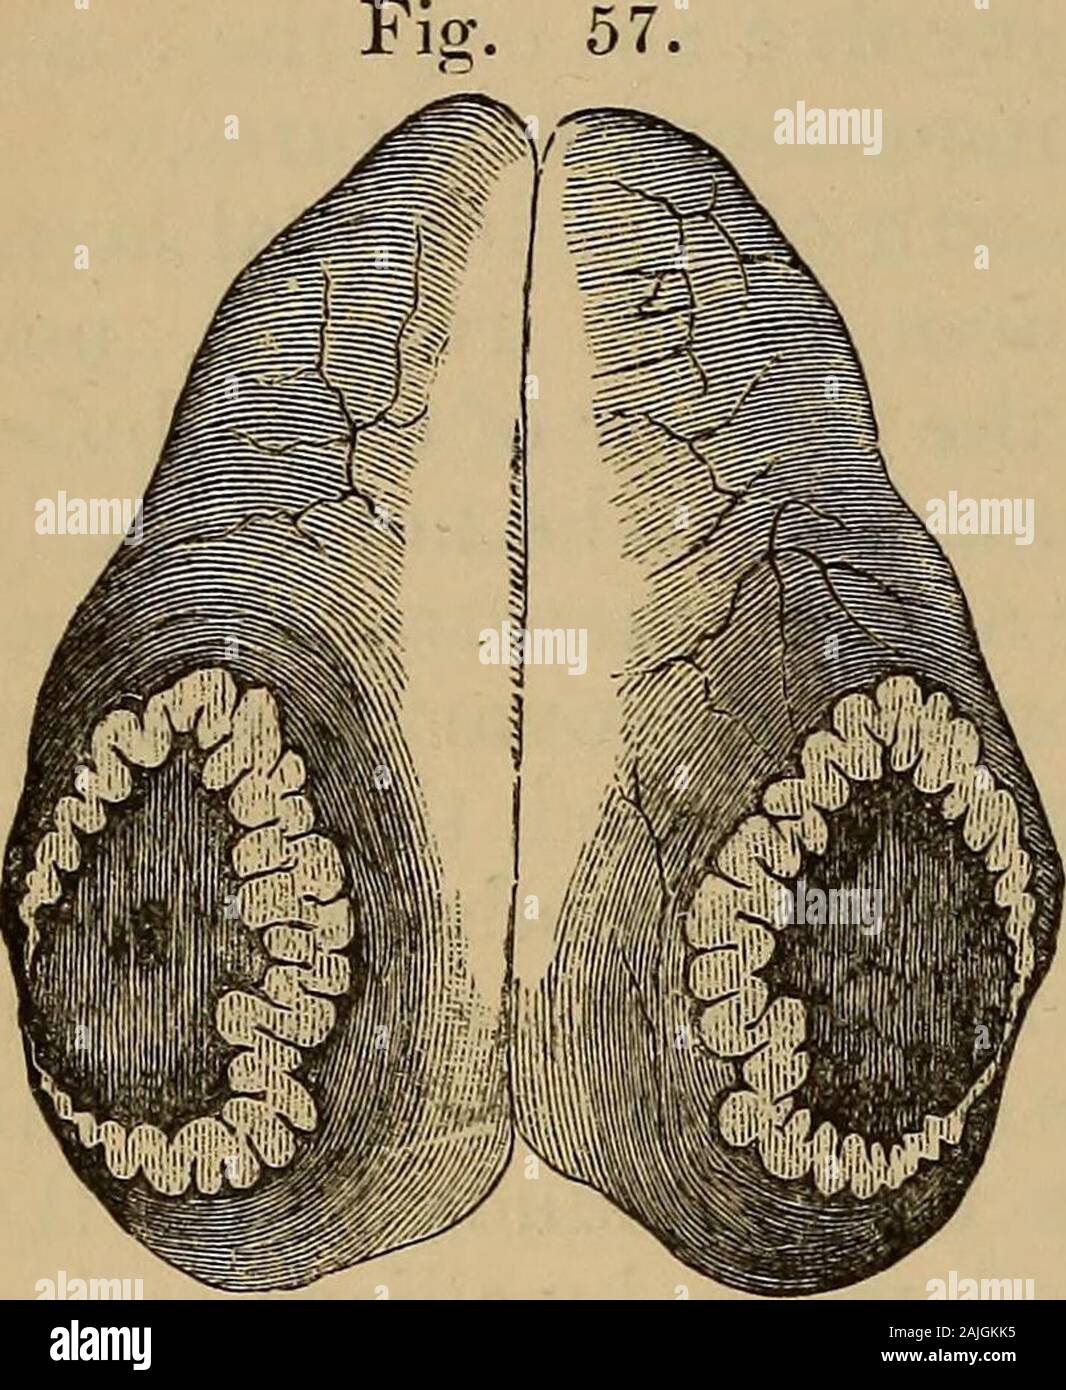 A treatise on the science and practice of midwifery . follicle, the cells of which have become greatly hyper-trophied and loaded with fat granules previous to rupture, is throwninto numerous folds. The greater the amount of contraction thedeeper these folds become, giving to a section of the follicle anappearance similar to that of the convolutions of the brain (Fig. 37).These folds in the human subject are generally of a brignl yellowcolor, but in some of the mammalia they are of a deep red. The tinlwas formerly ascribed by Raciborski to absorption of the coloringmatter of the blood-clot cont Stock Photo